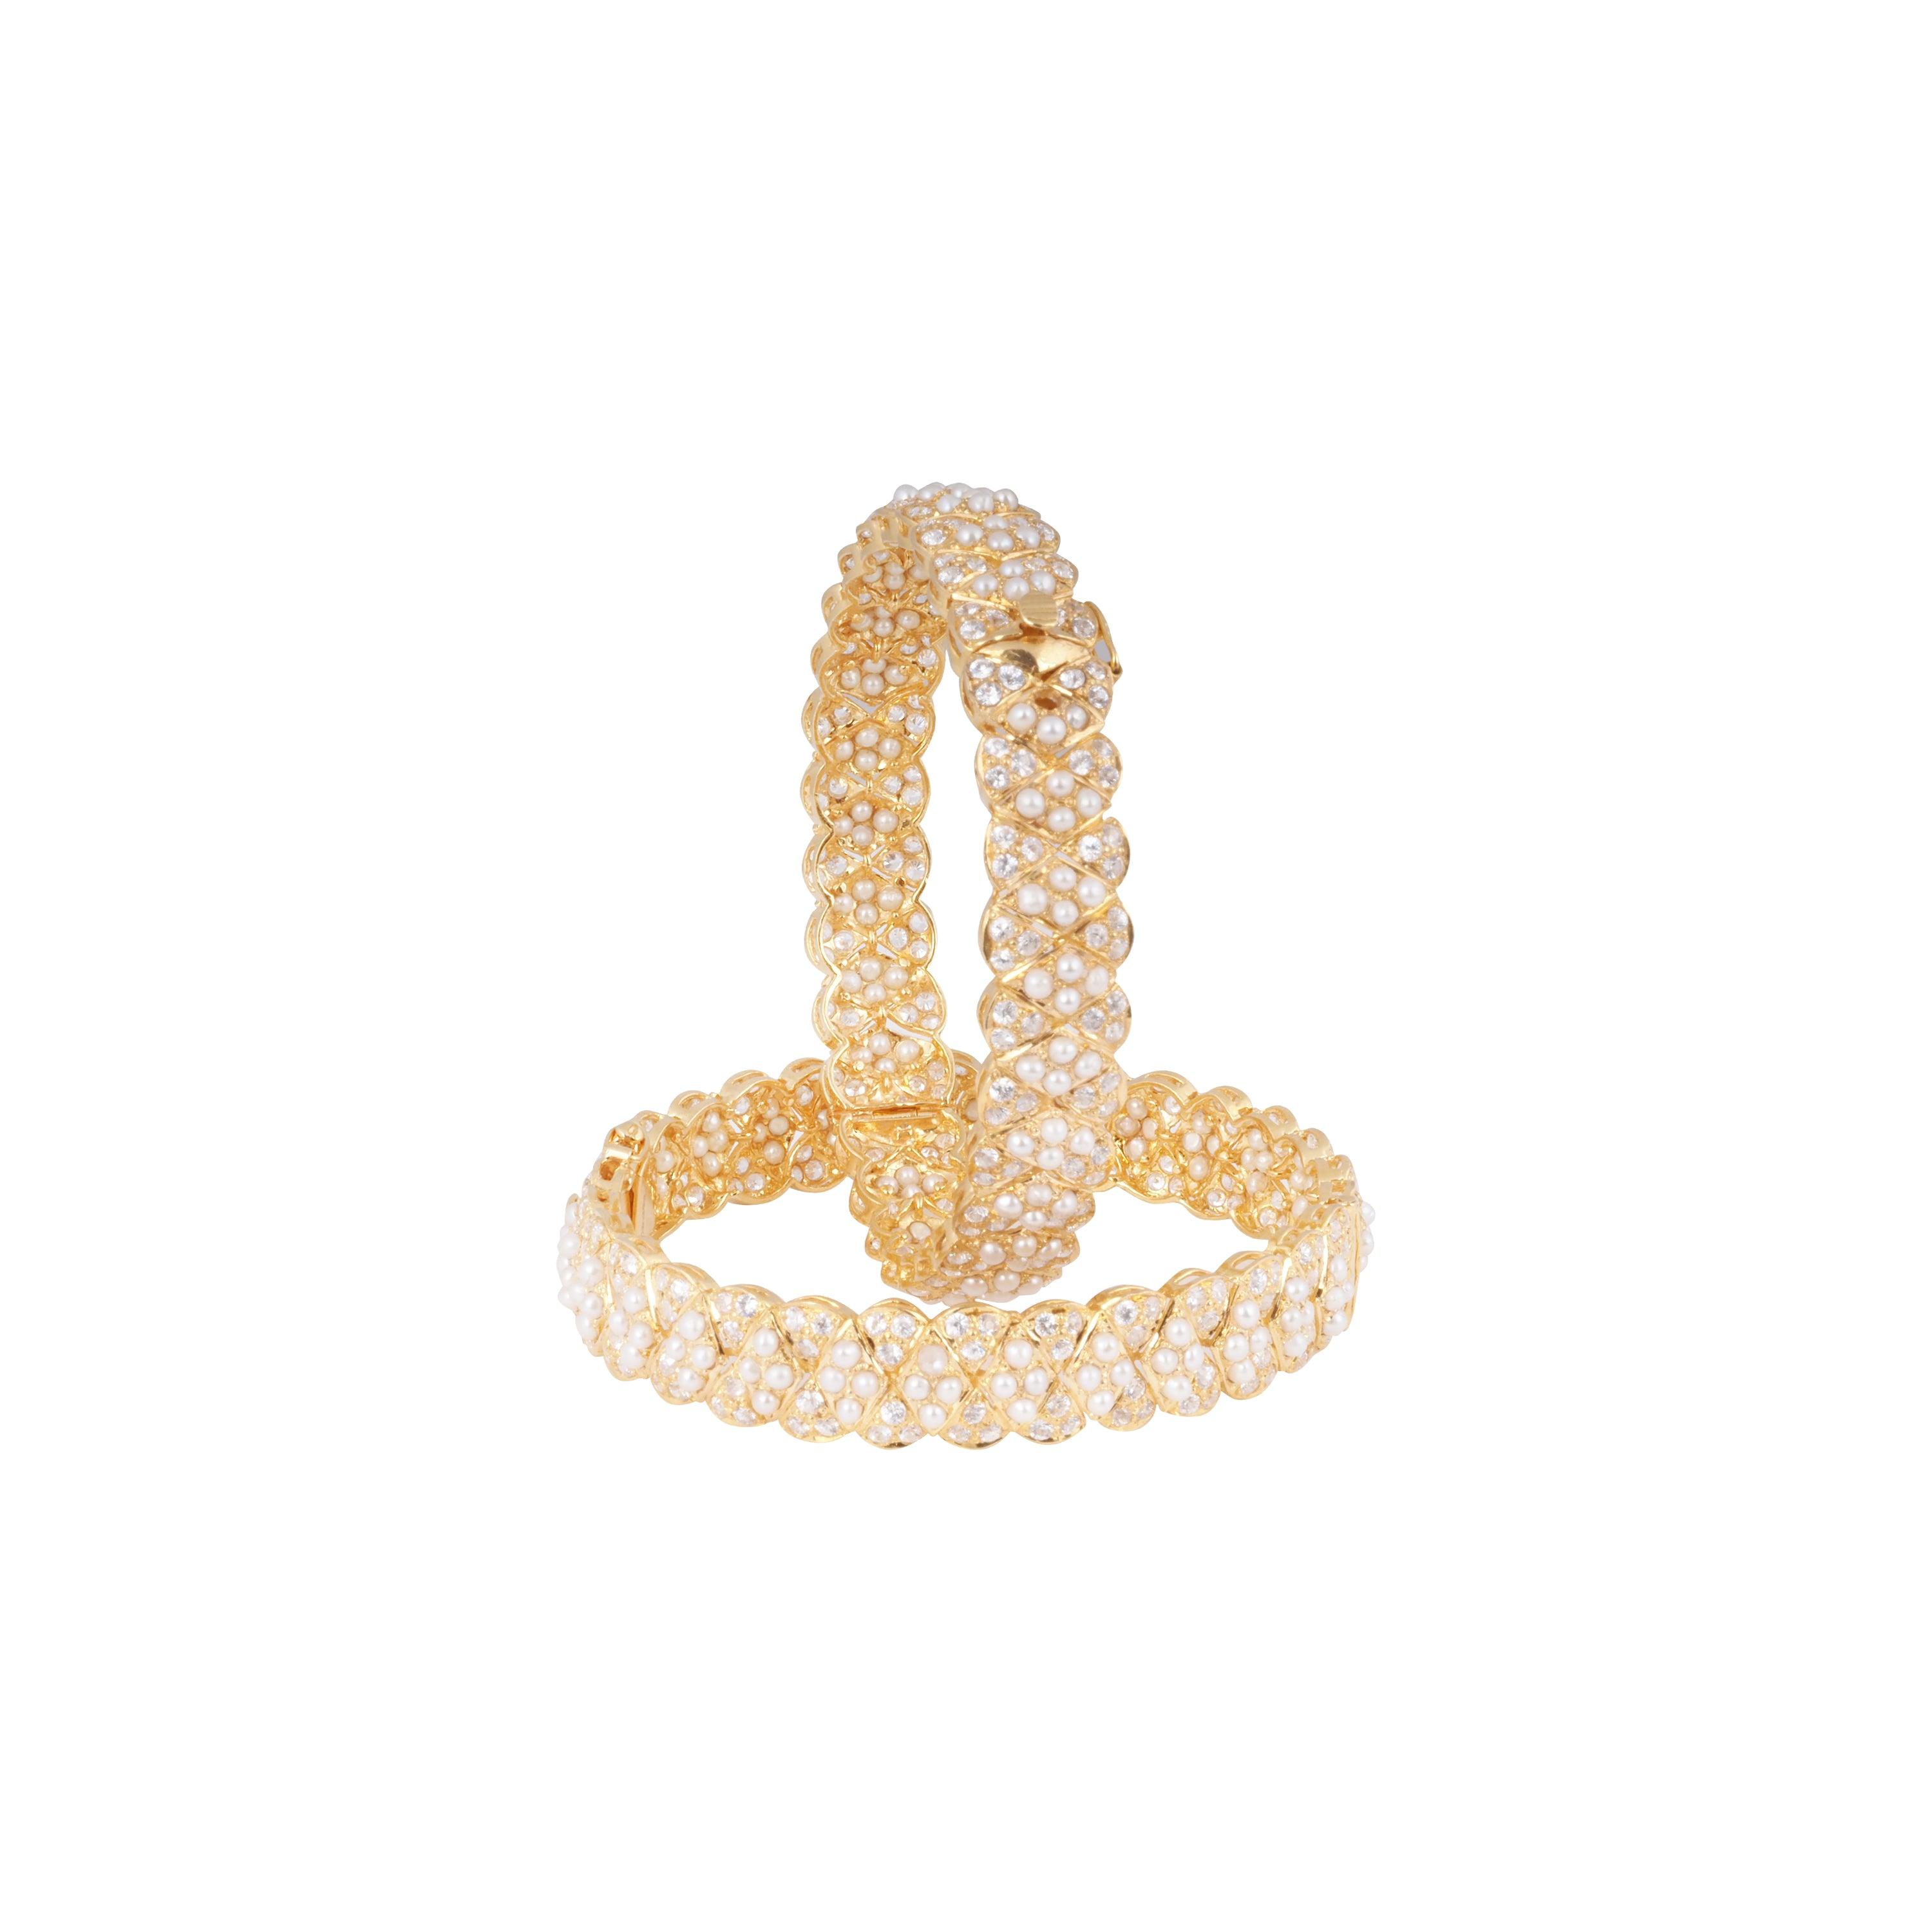 22ct Gold Openable Bangle in Cultured Pearls and Cubic Zirconia Stones with Tongue & Lip Clasp B-8597 - Minar Jewellers